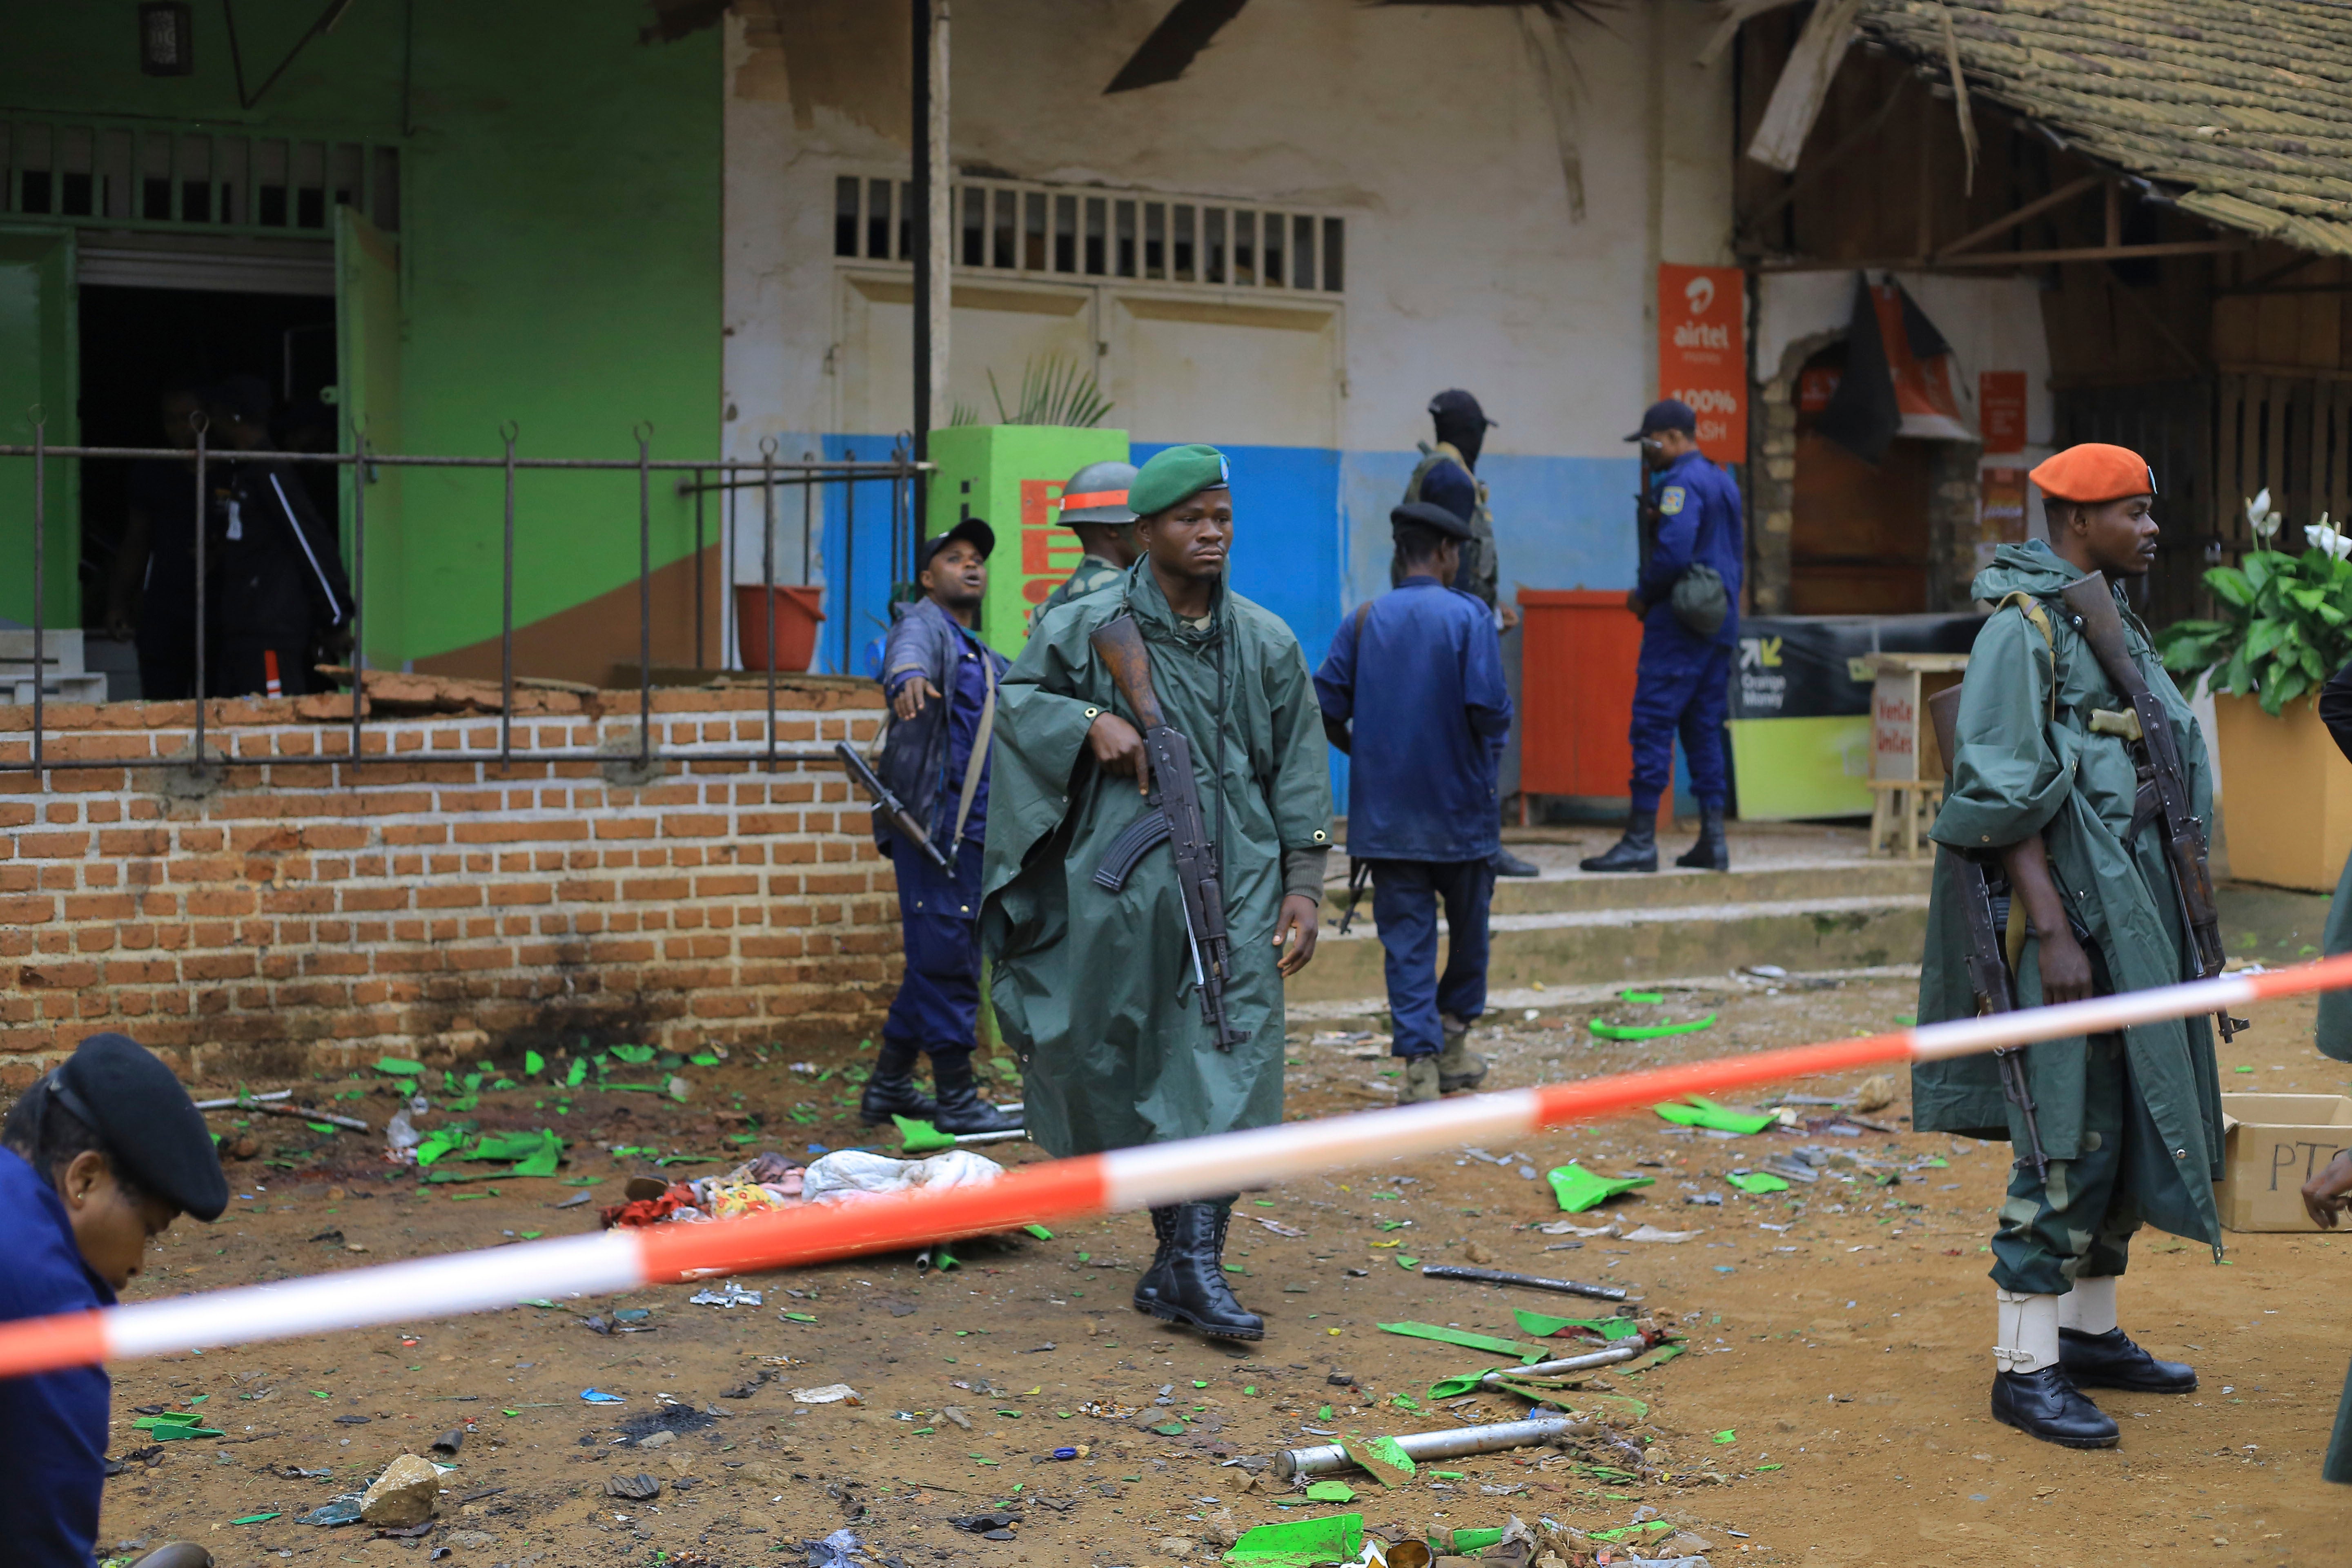 Police officers inspect the scene of a bomb explosion in Beni, eastern Congo, which left six dead